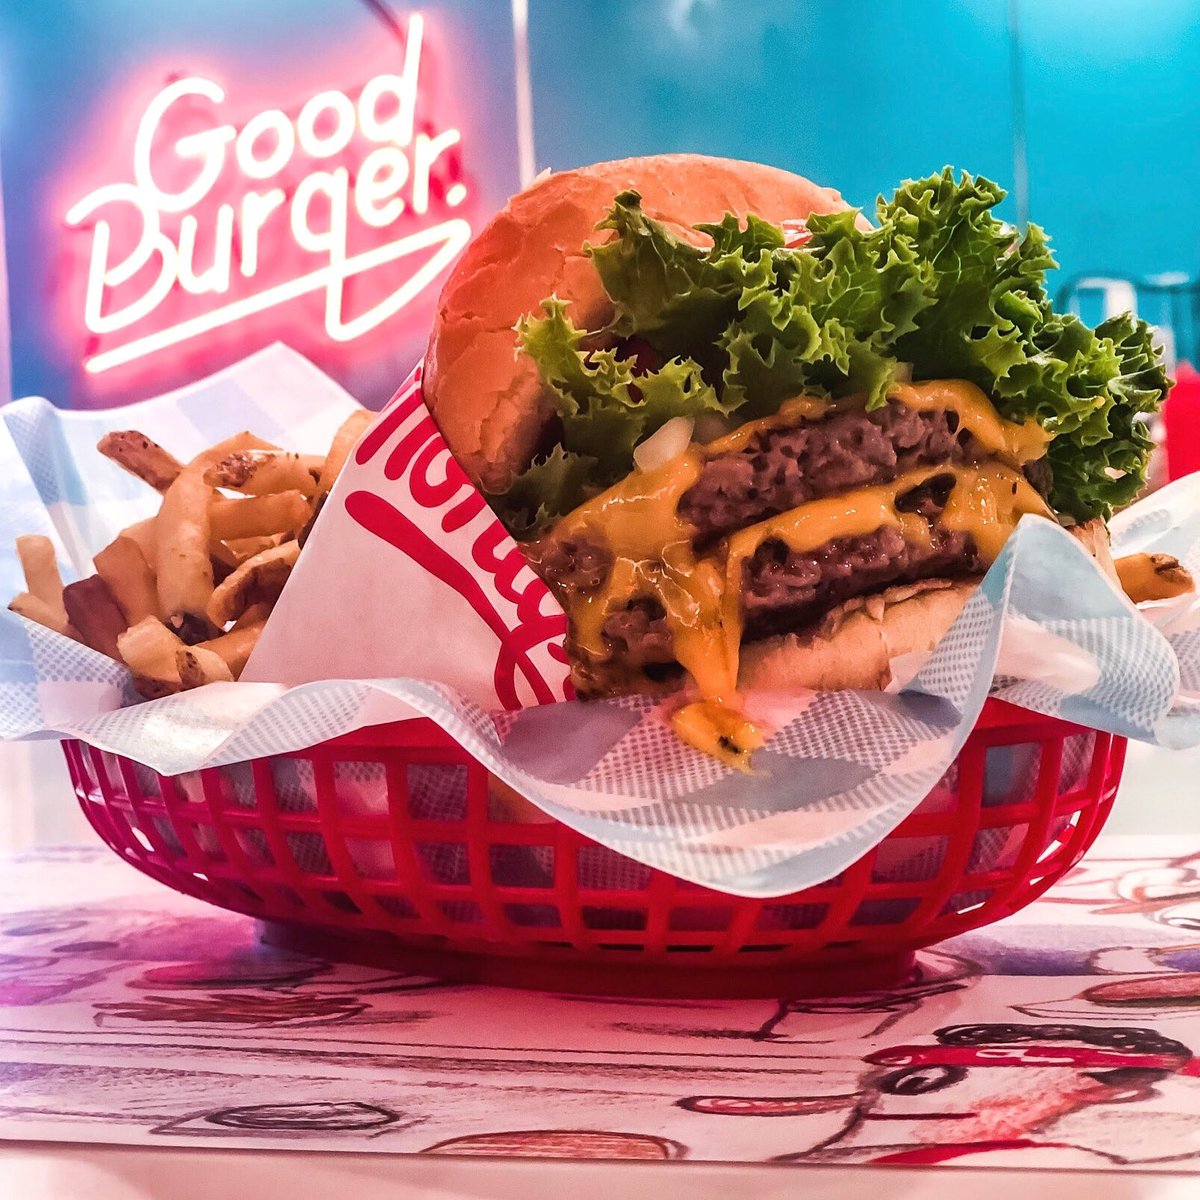 ”People will travel anywhere for good food - it's crazy.” We headed over to Monty’s Good Burger @montysgoodburger and fell in love. 🌱🌿💯% #plantbased #phenomenal #burger #alkalinediet  #flavor #bestfood #californiafoodie #riverside #foodlab #dofriesgowiththatshake #vegan